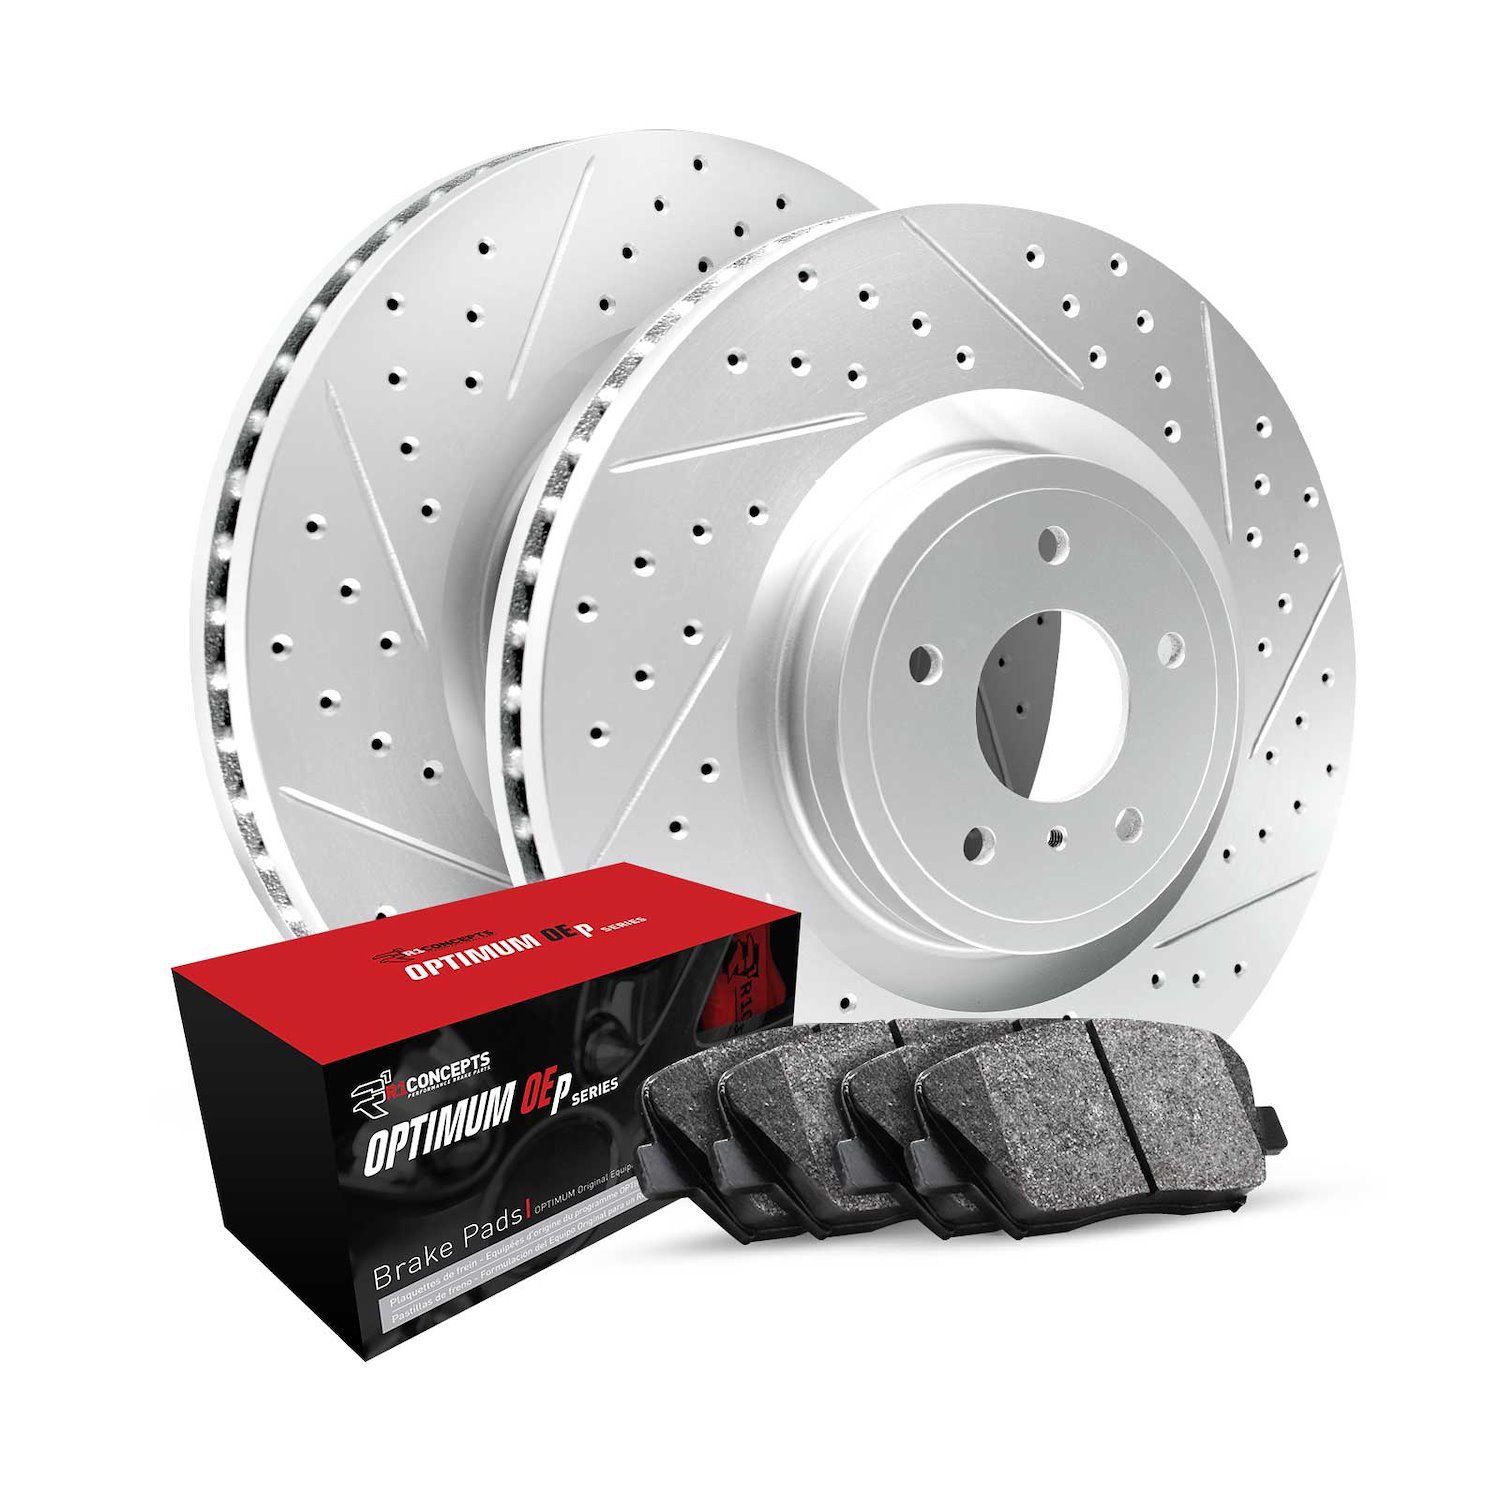 GEO-Carbon Drilled/Slotted Rotors w/Optimum OE Pads, Fits Select